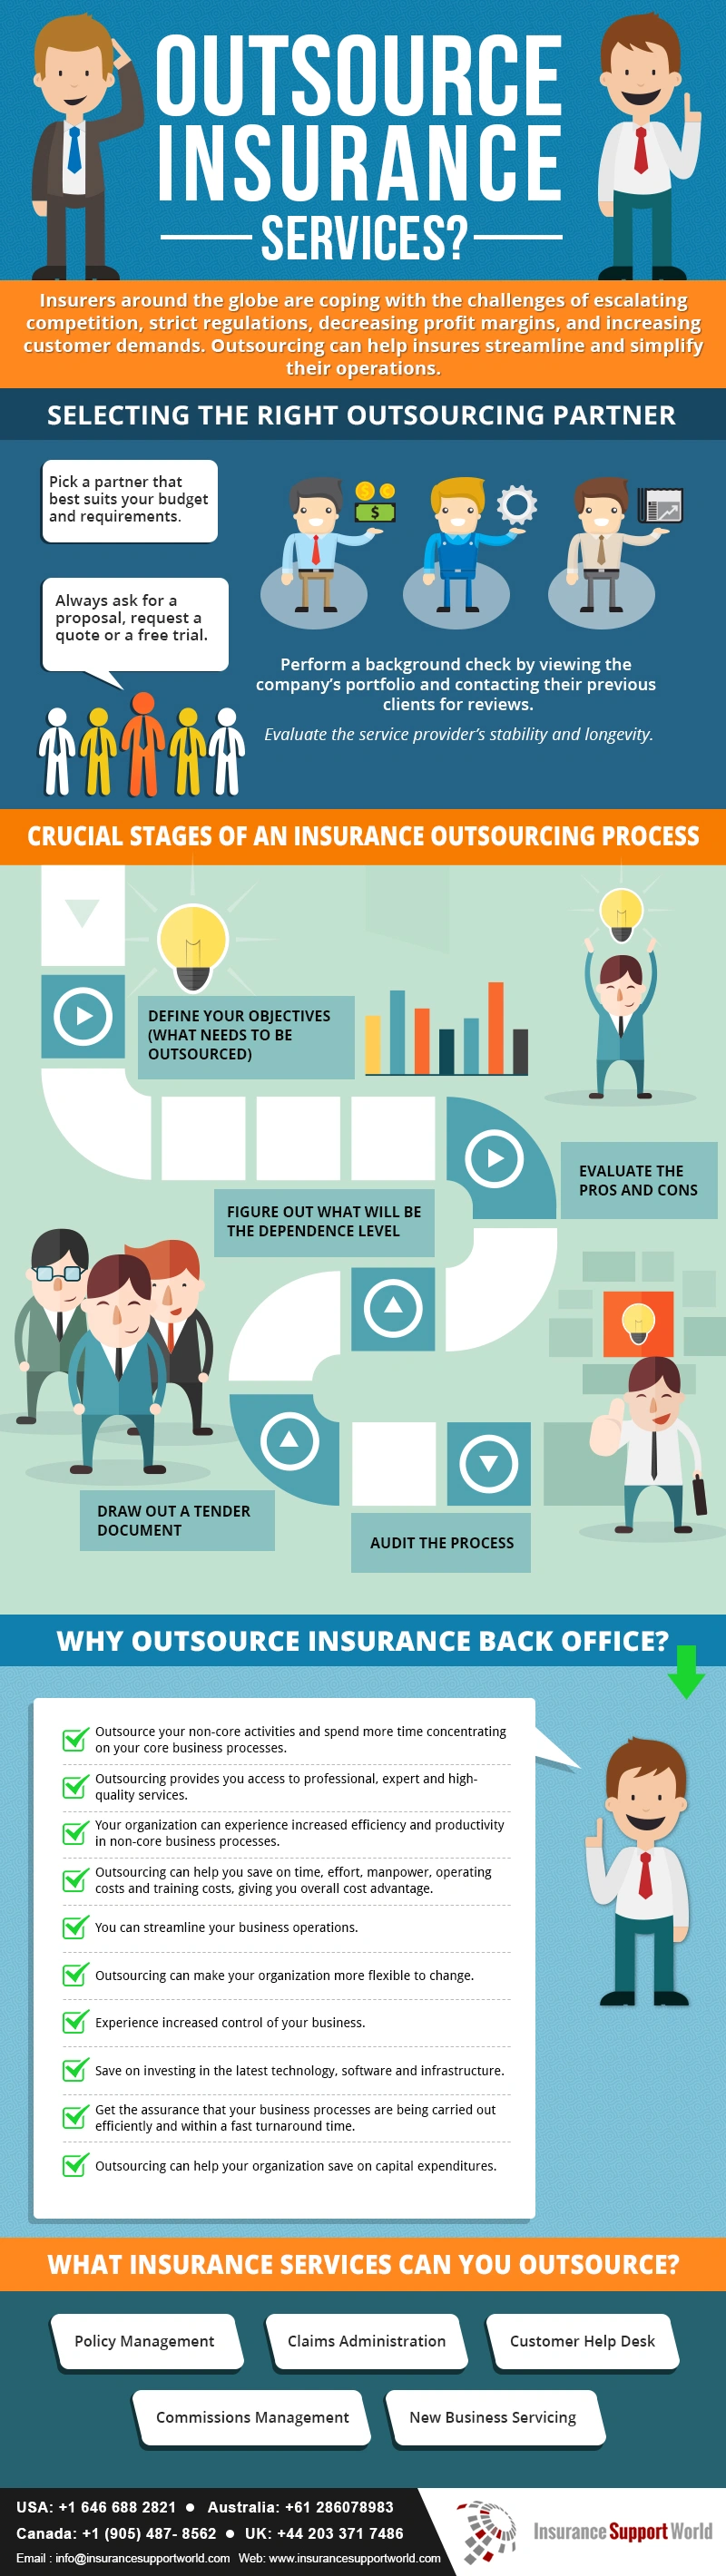 Outsource Insurance Services